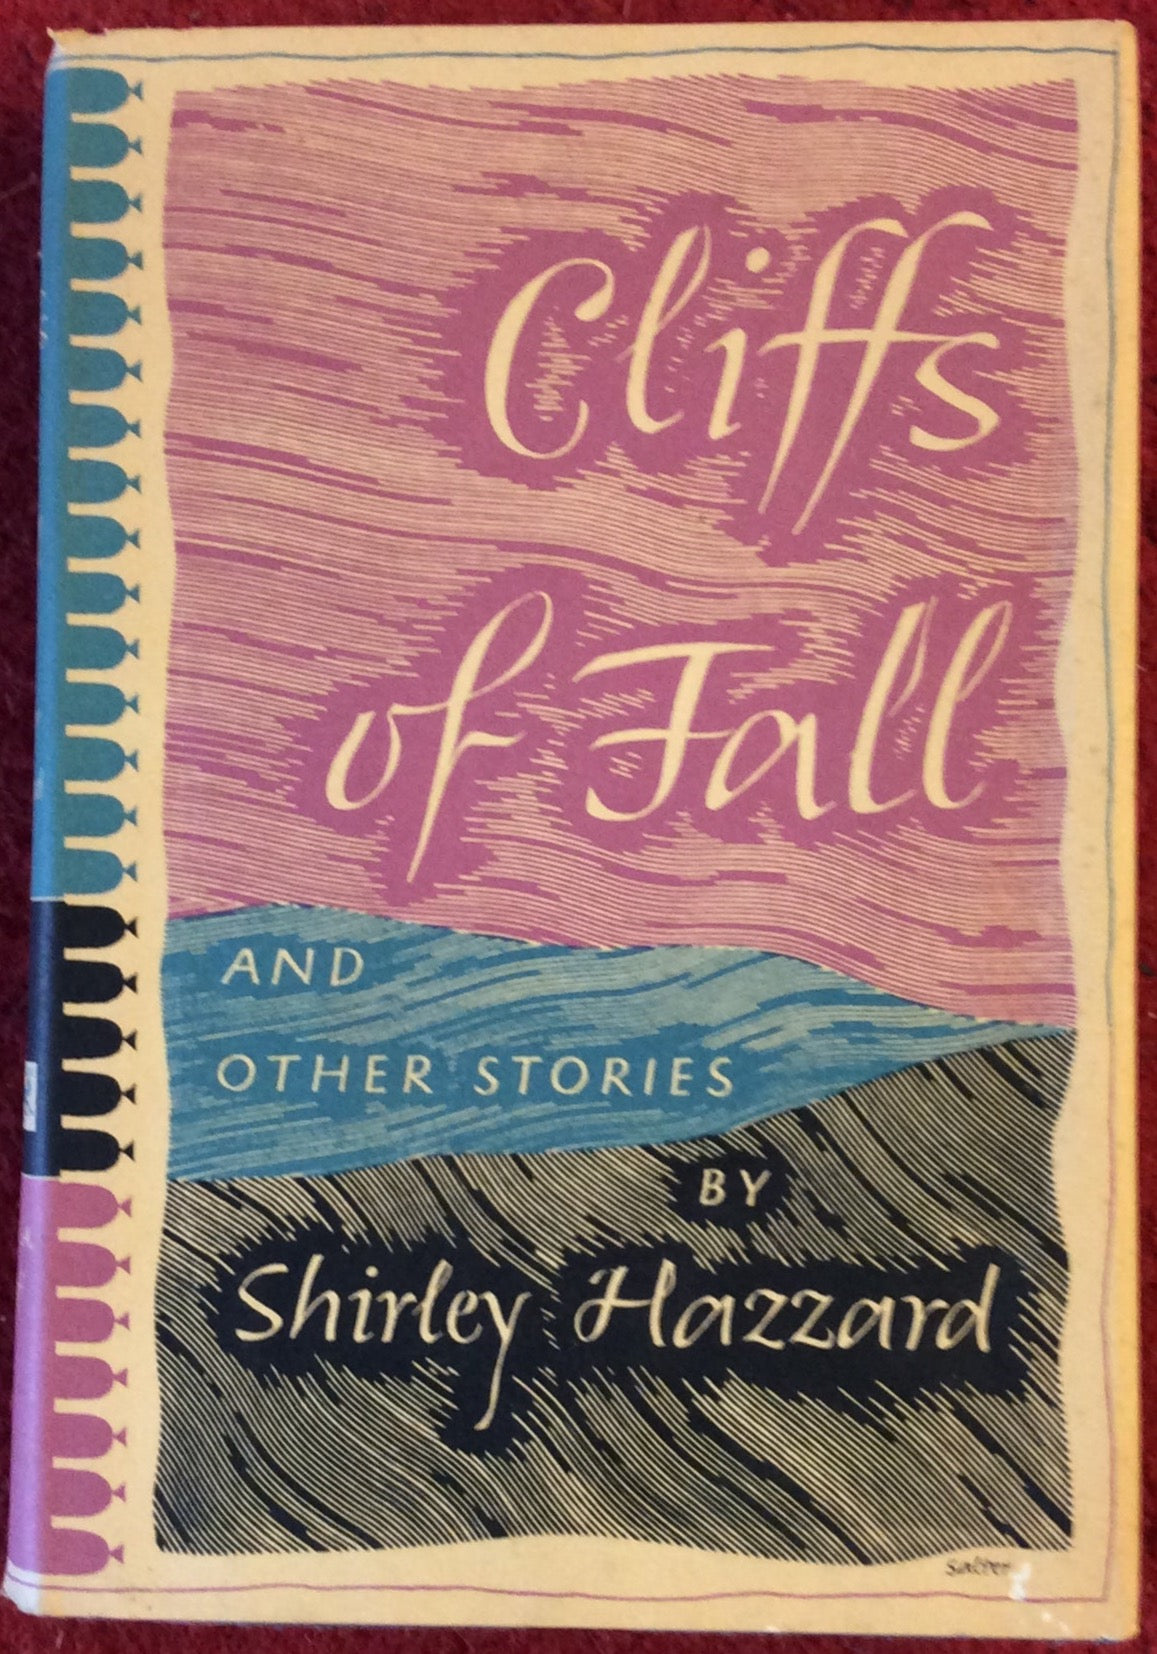 Cliffs Of Fall and Other Stories, Shirley Hazzard, Alfred A. Knopf, 1963 *